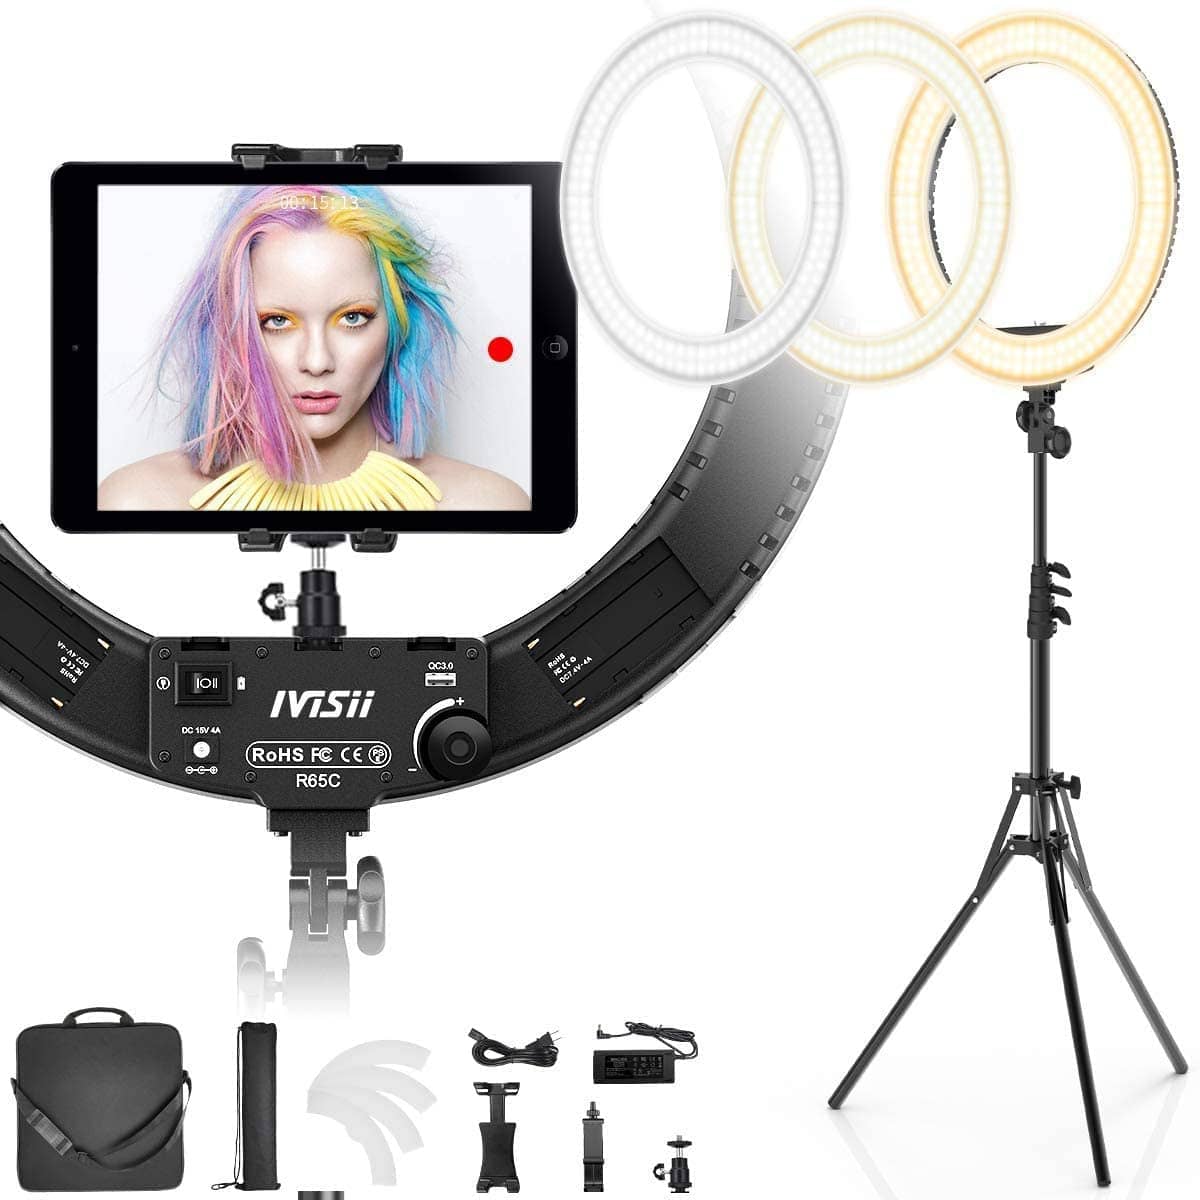 IVISII 19 inch Ring Light with Stand and Phone Holder,60W Bi-Color